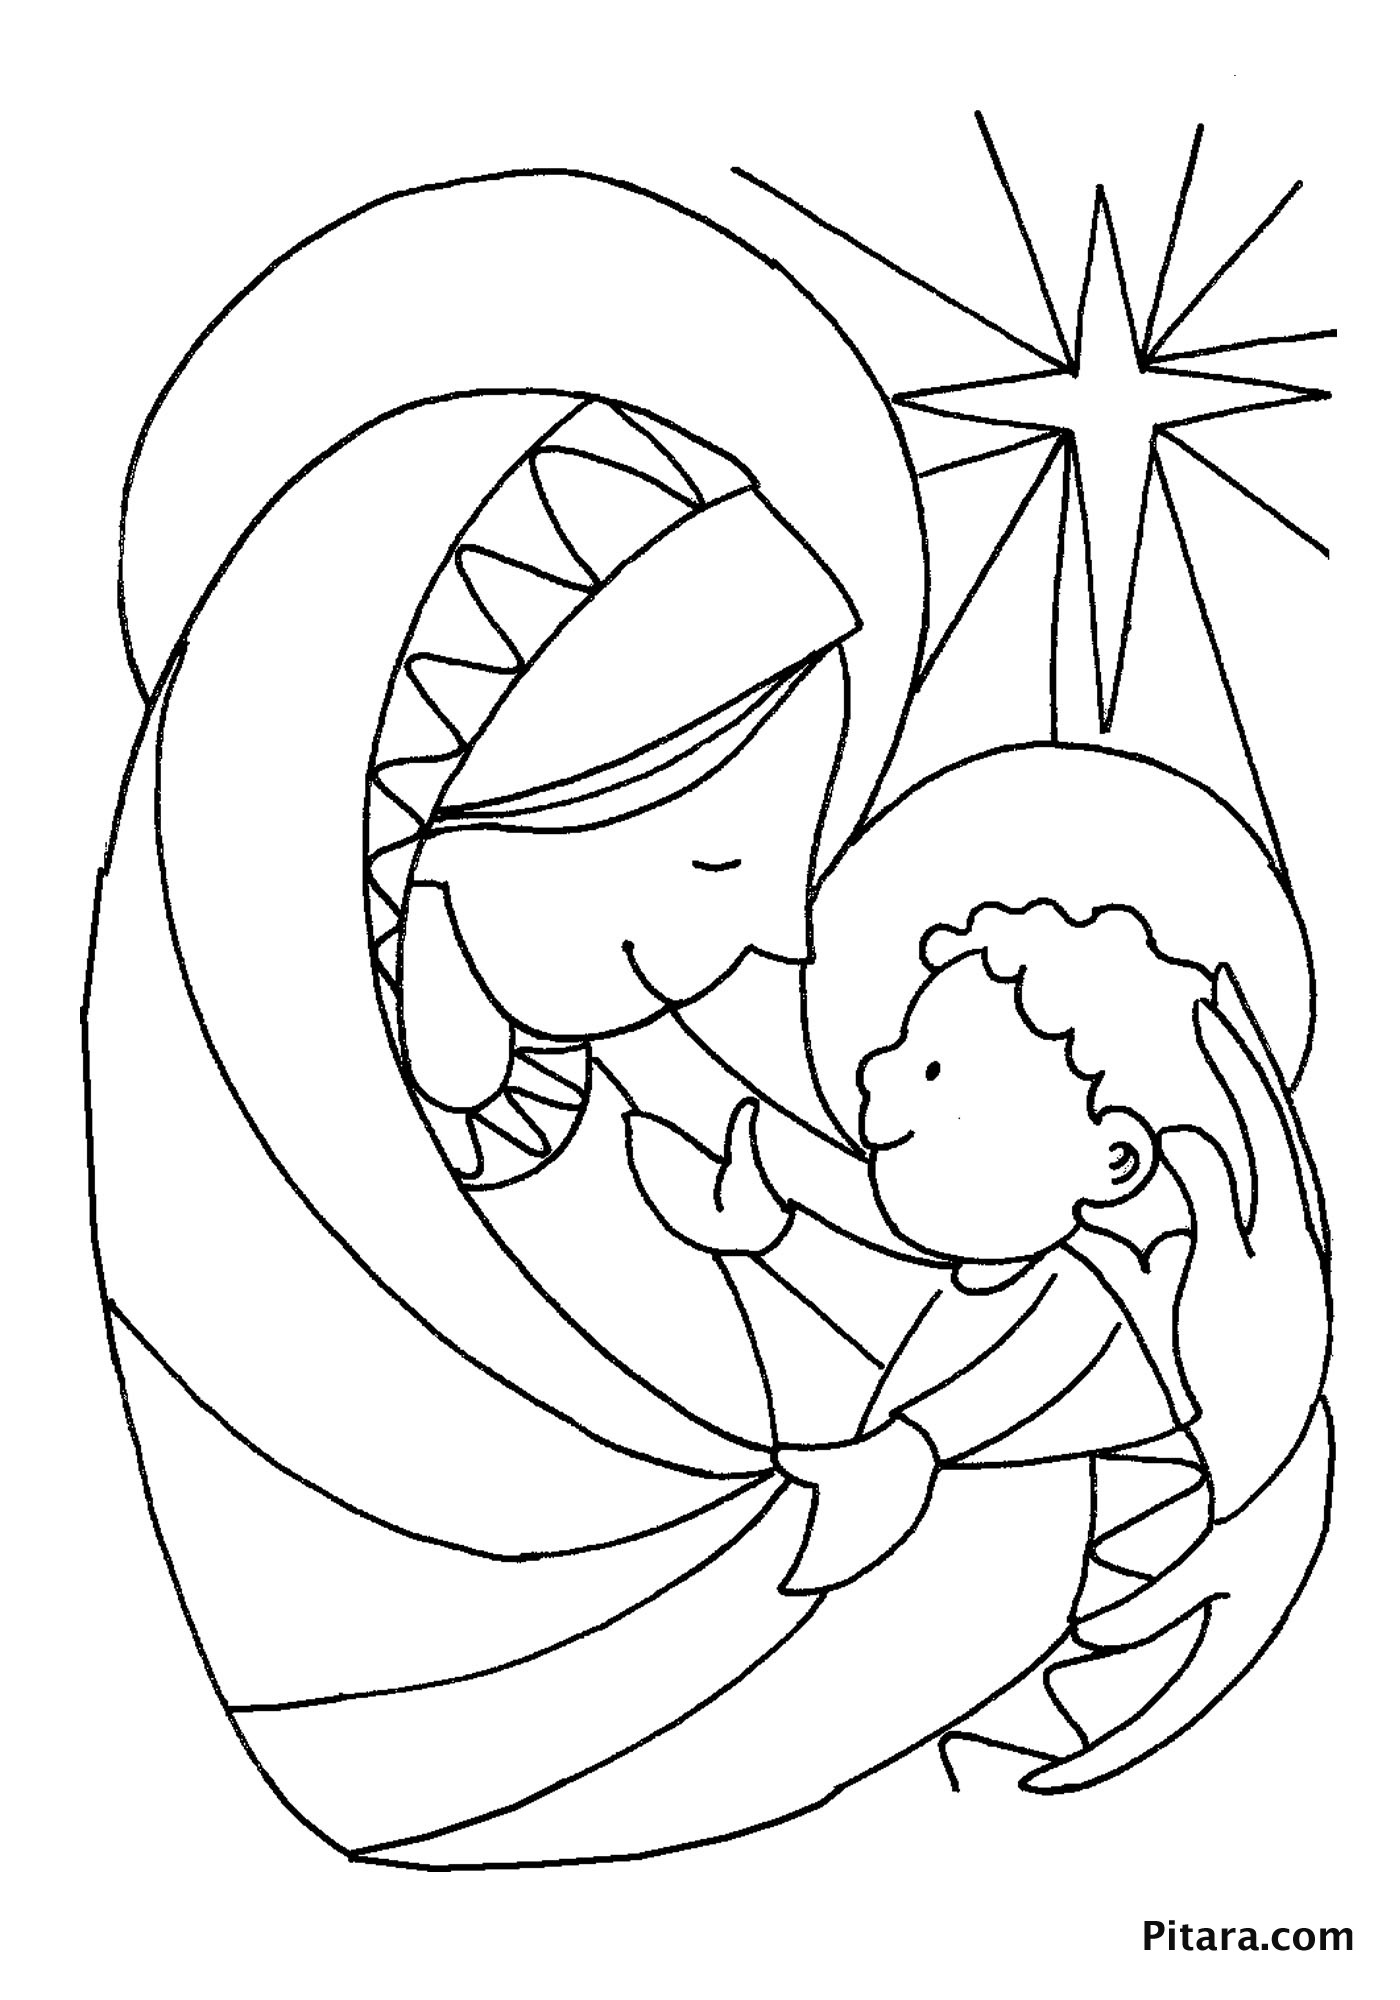 Mary & baby Jesus – Coloring page